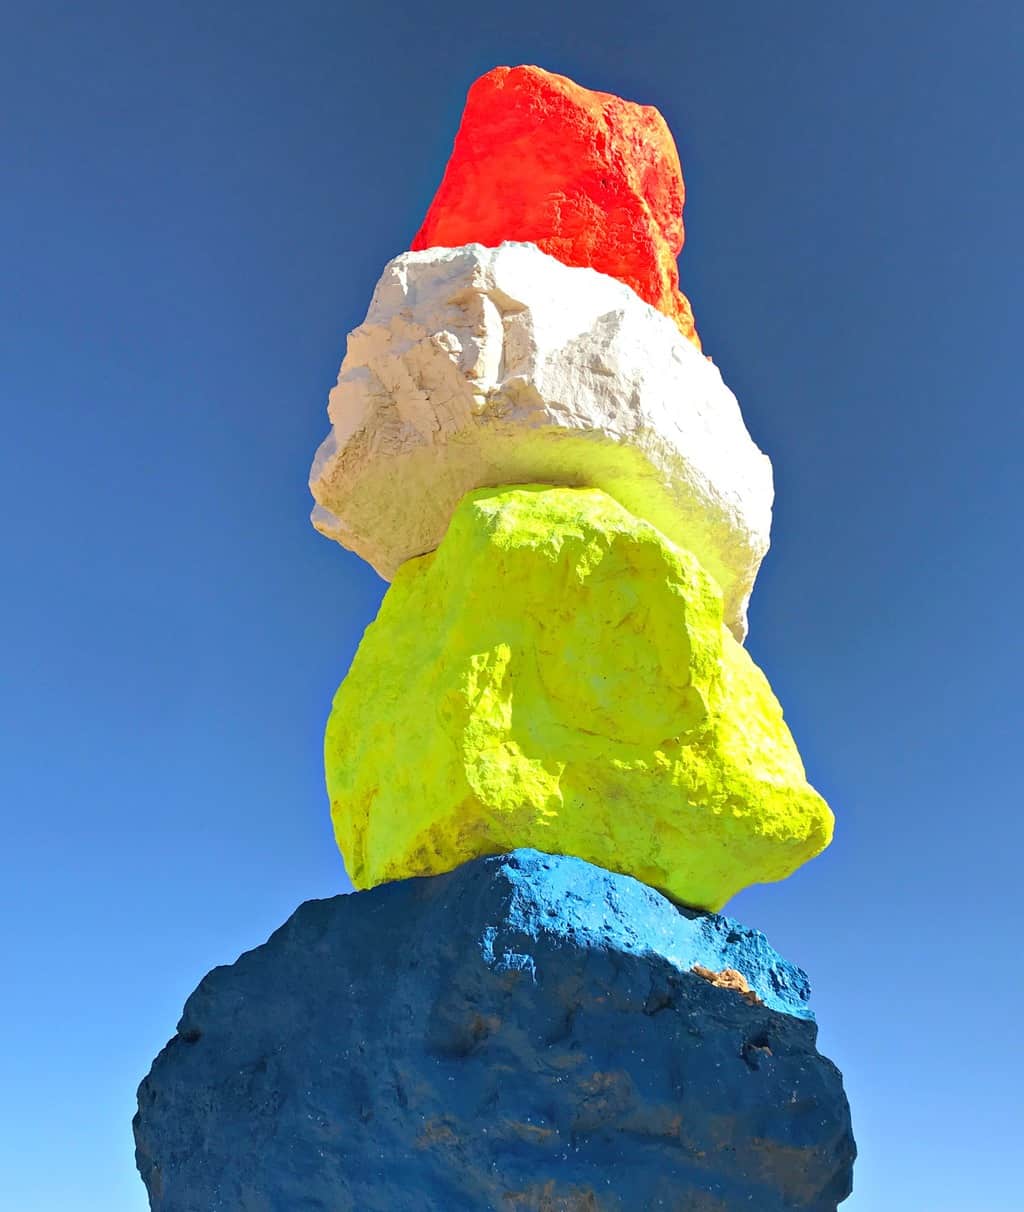 As one of the largest land-based art installations in the United States, Seven Magic Mountains, located right outside of Las Vegas, is bringing happiness to the desert.  Positioned within the Ivanpah Valley and surrounded by the local mountains, Seven Magic Mountains stands out as eye candy along the freeway.  Each locally-sourced limestone boulder boasts a different fluorescent color ranging from neon pink to deep ocean blue. The art exhibit is open year round.